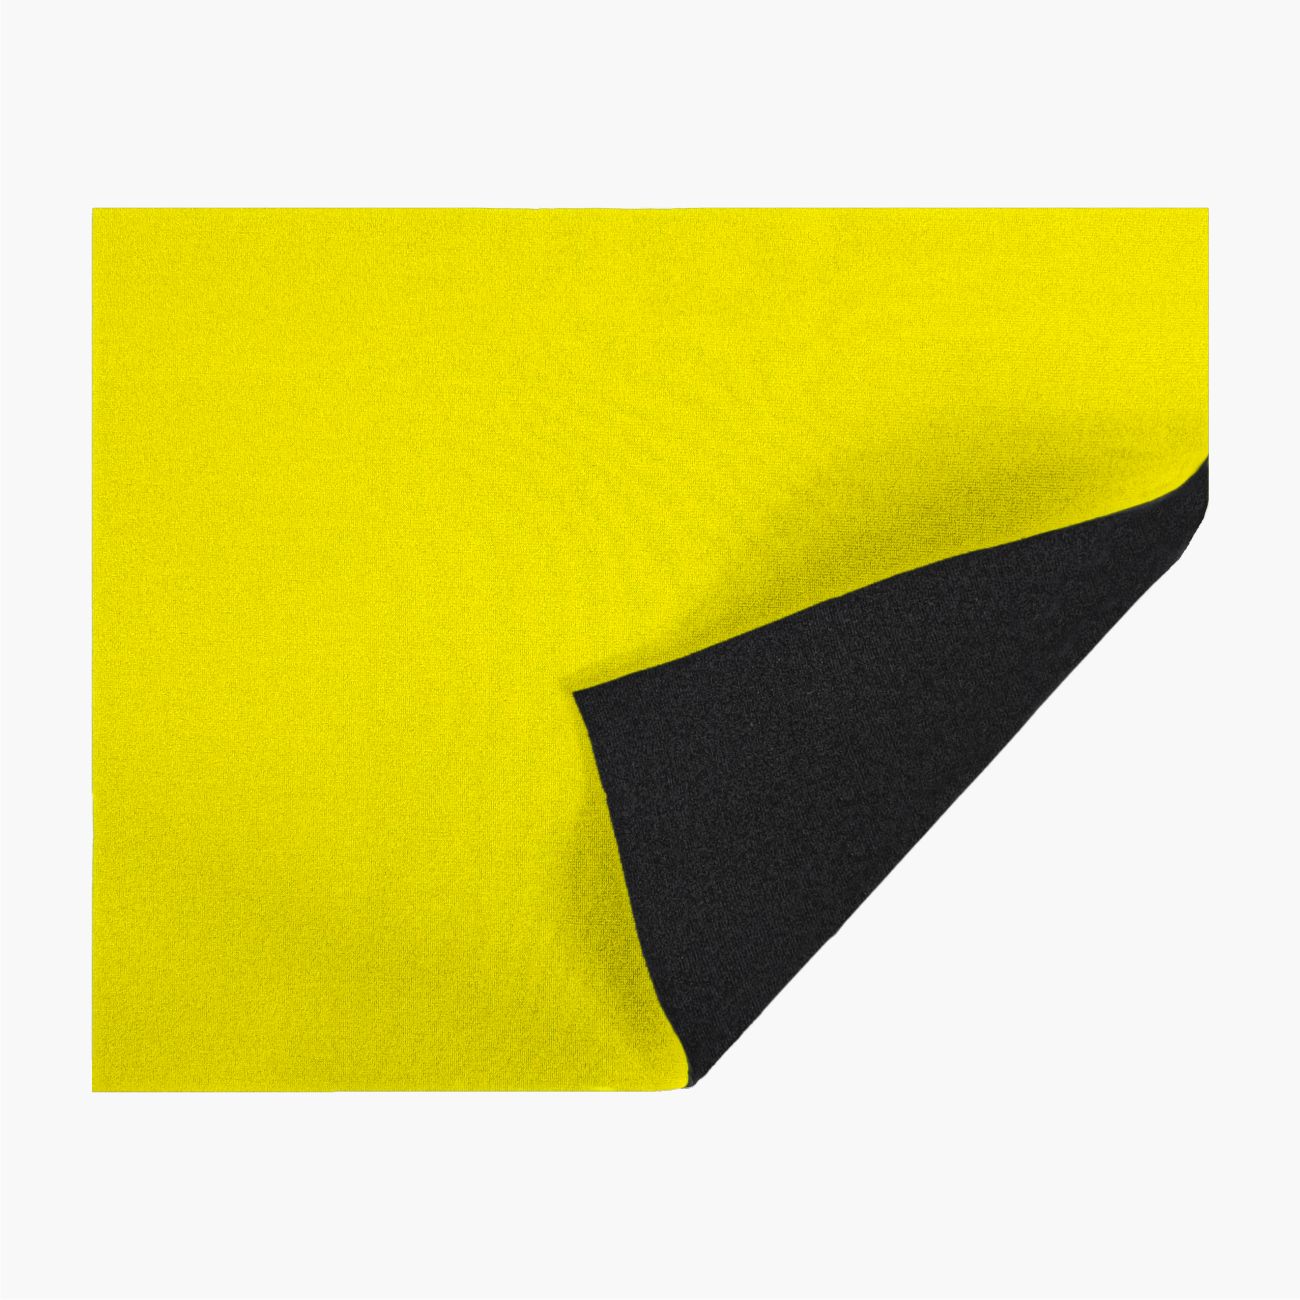 Neoprene Fabric: An Amazing Material That You Need To Know About